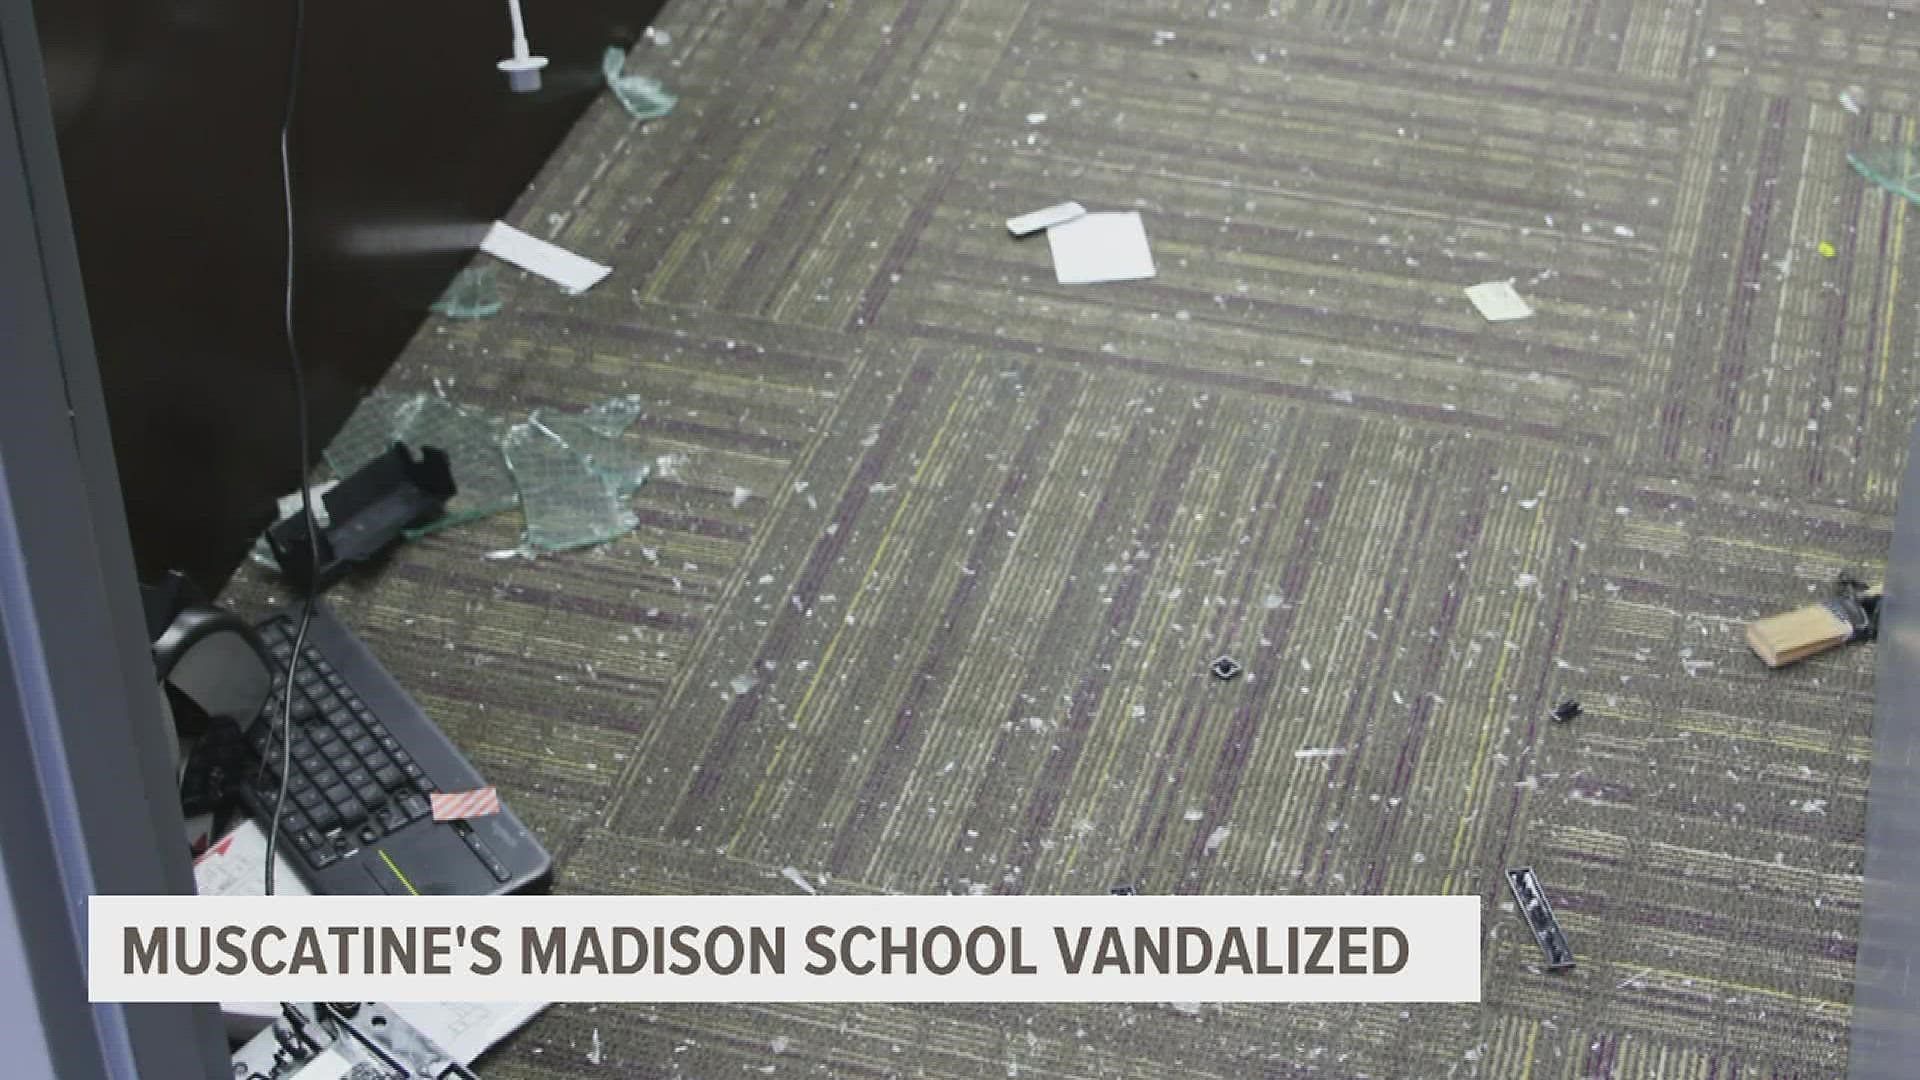 The vandalism inside the school occurred at approximately 3:10 a.m. on Friday August 5.